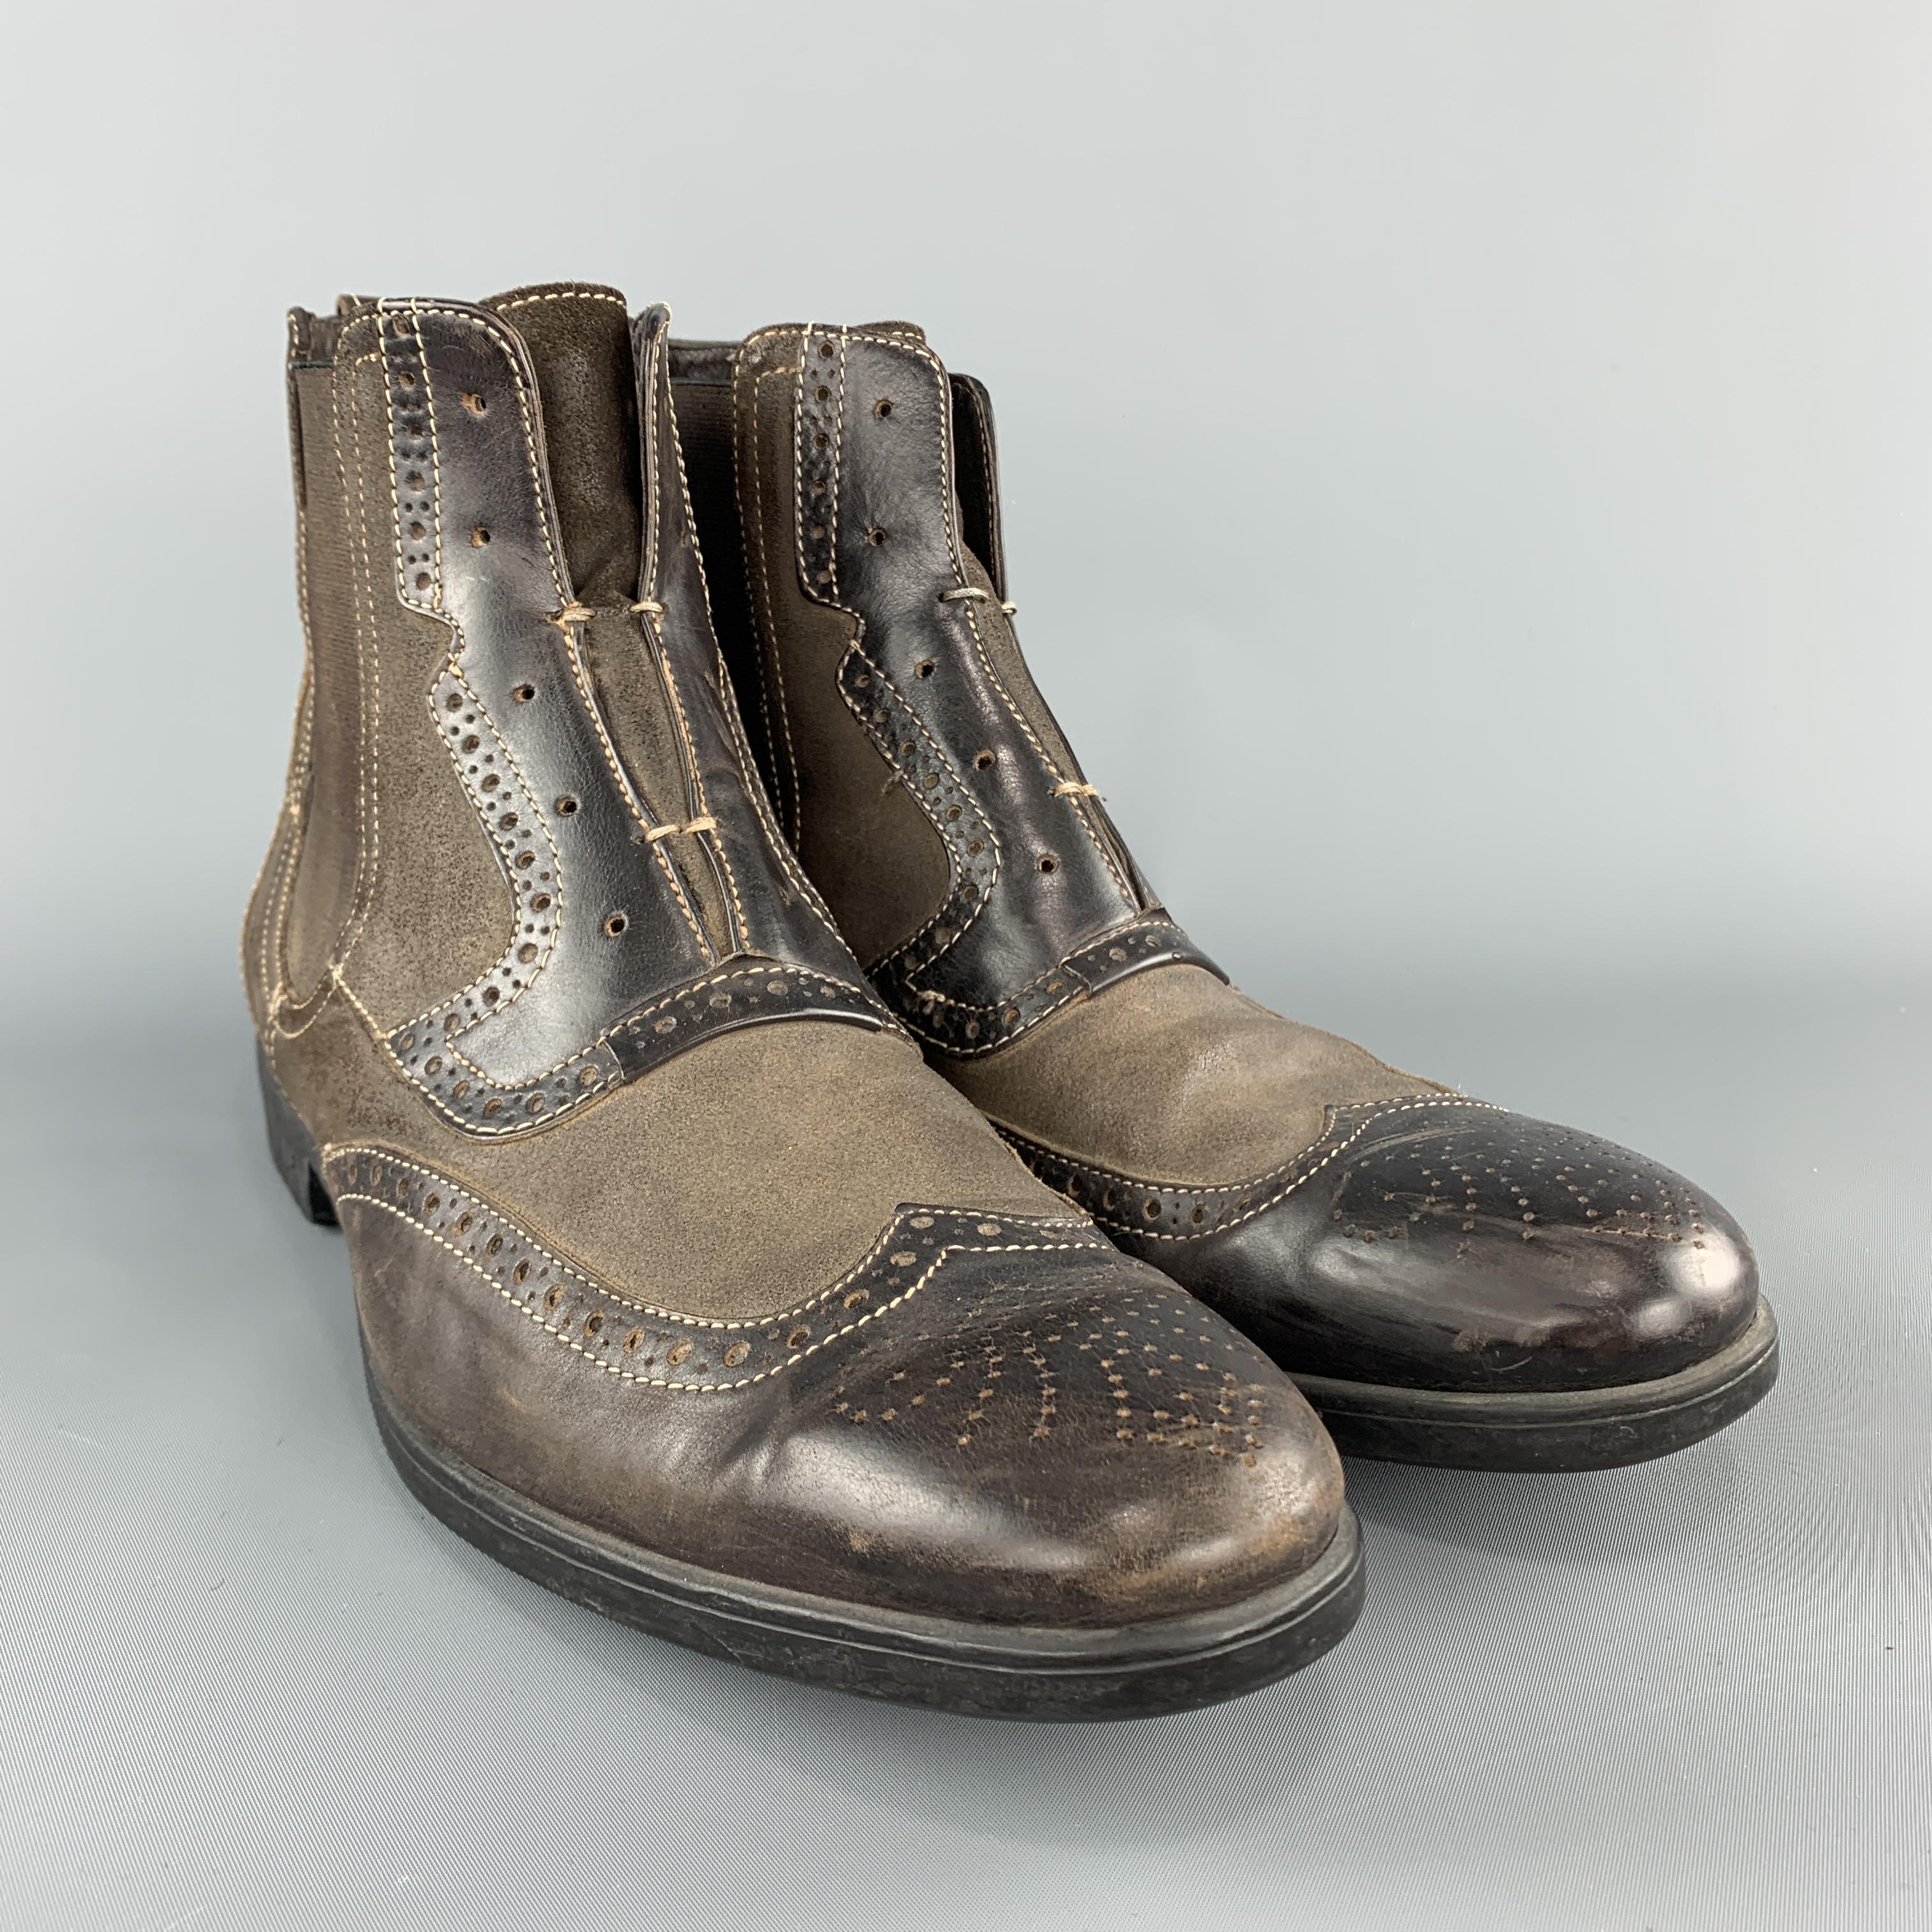 JOHN VARVATOS chelsea boots come in taupe matte leather with brown panels, wingtip toe, rubber sole,  and stretch sides. Hand Made in Italy.

Good Pre-Owned Condition.
Marked: US 11.5

Outsole: 12.5 x 4 in.